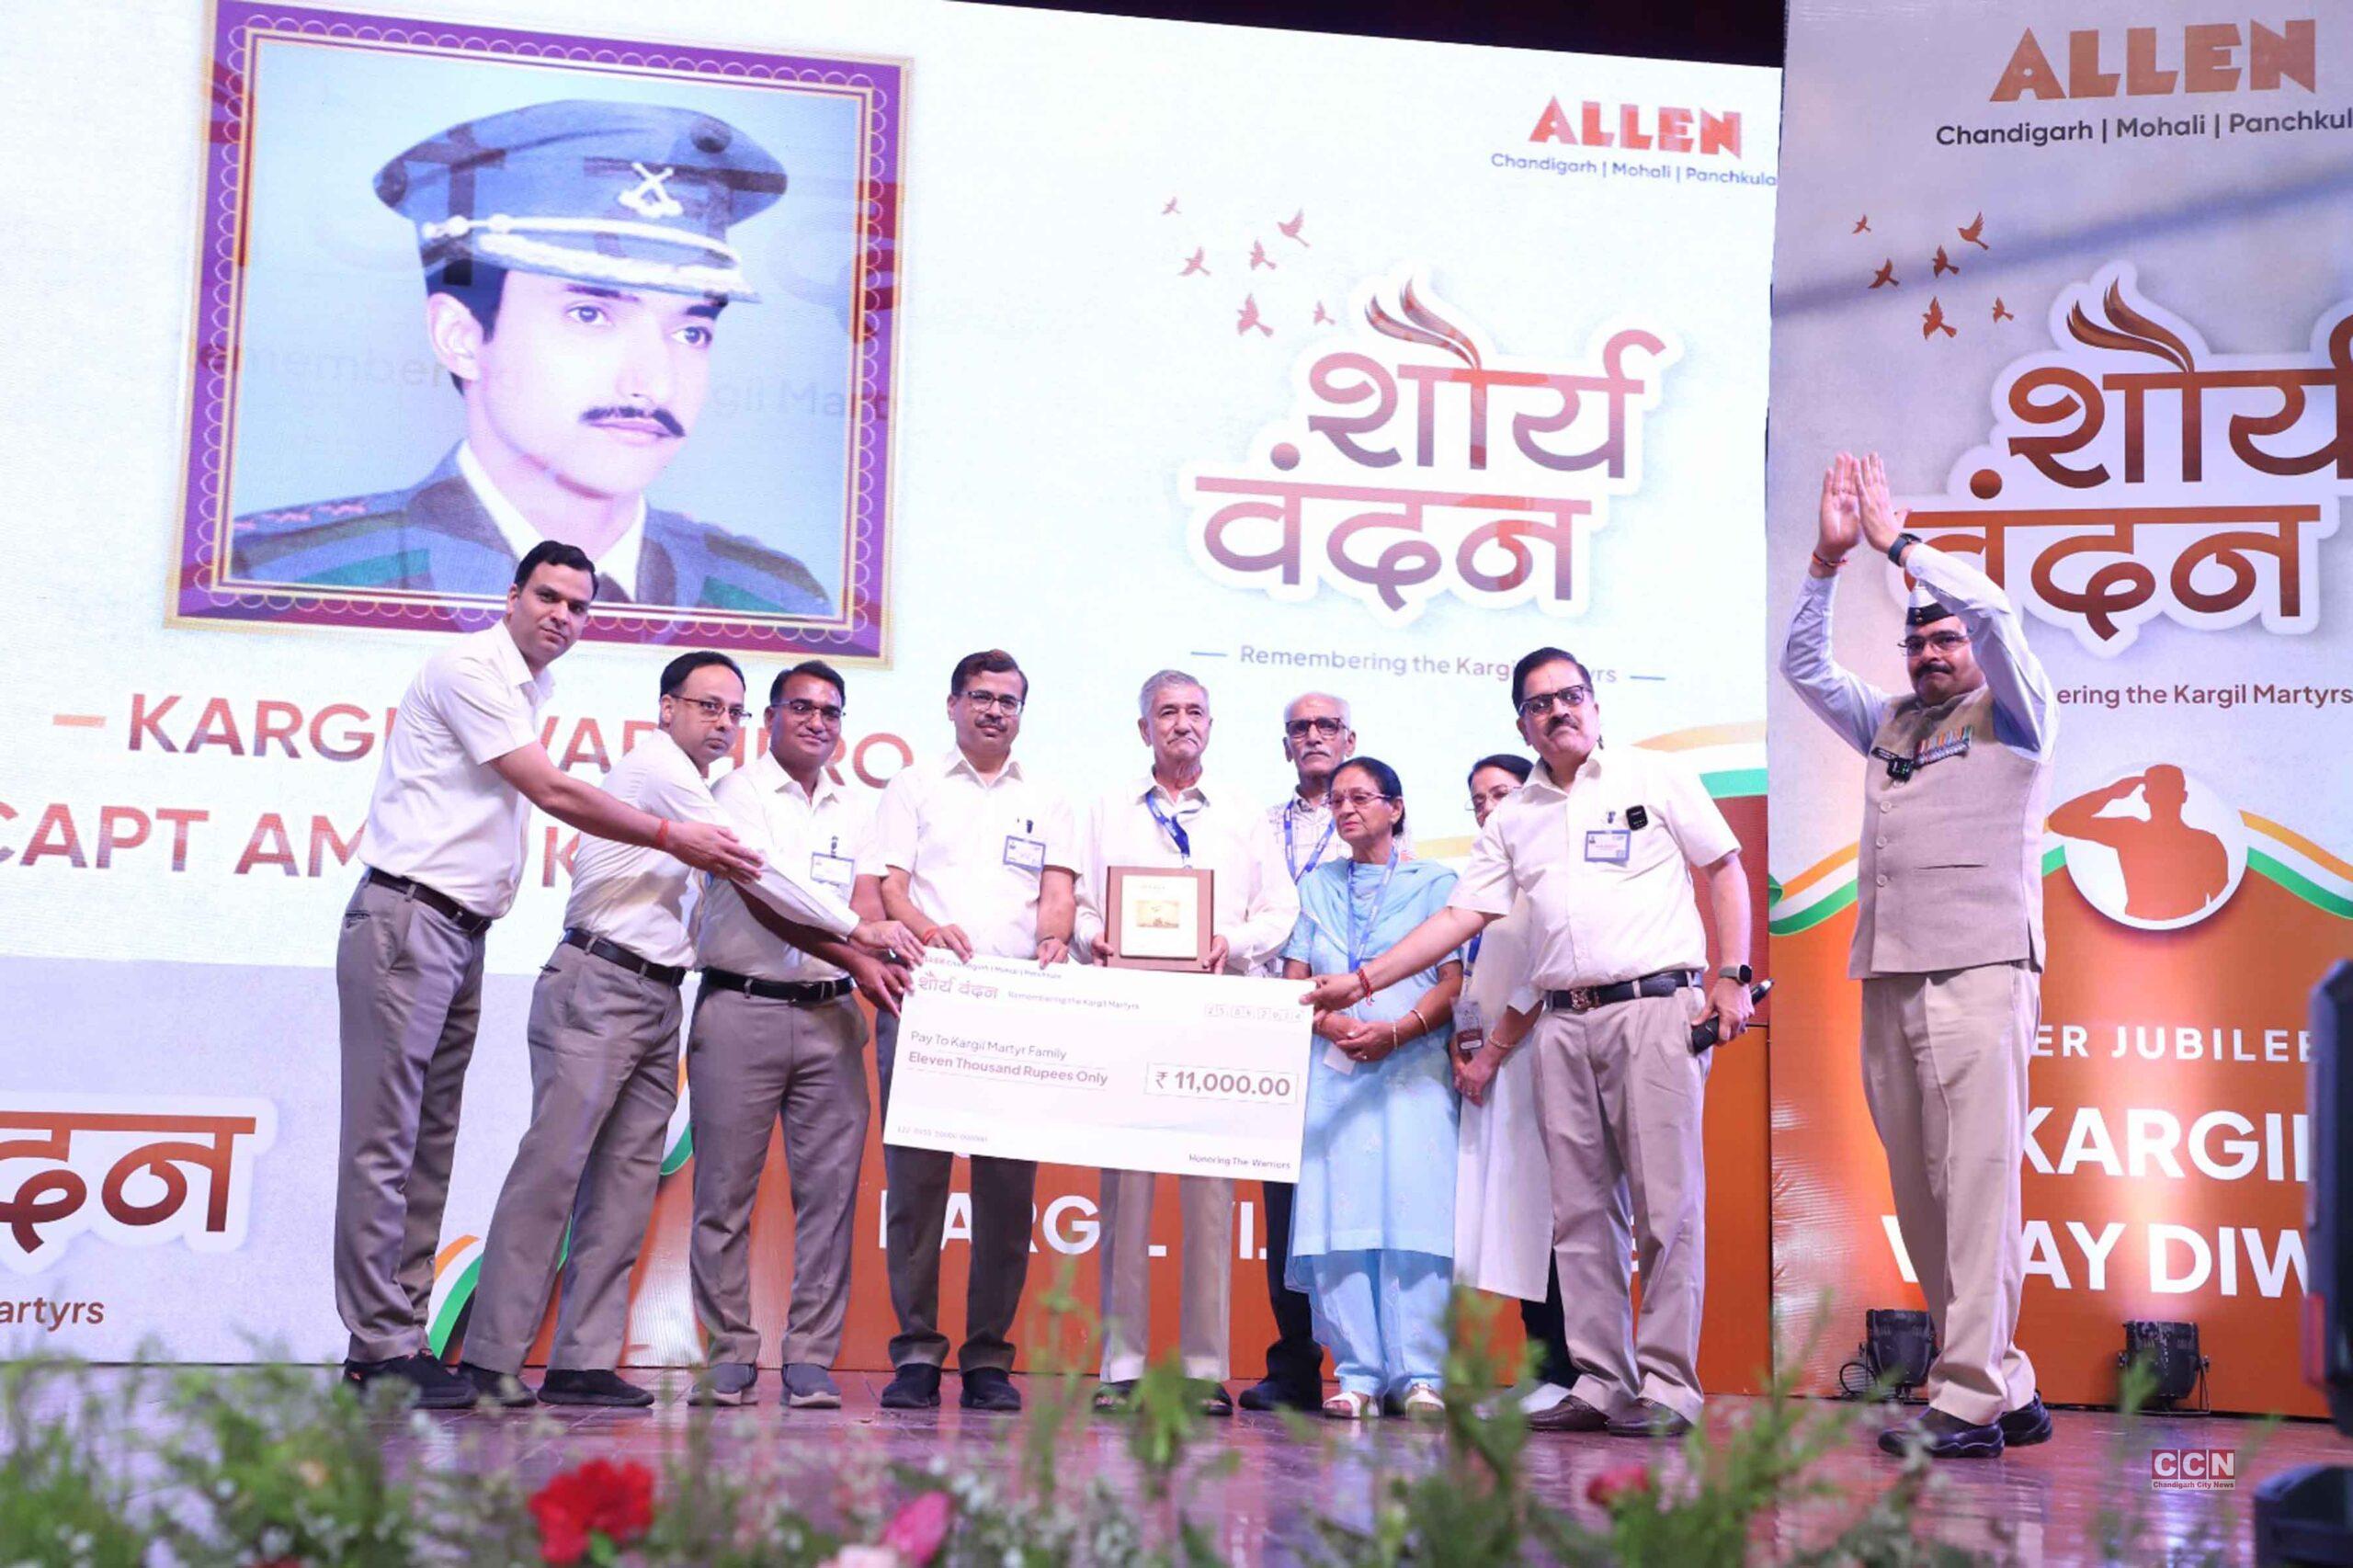 Allen Chandigarh honored the families of Kargil Martyrs